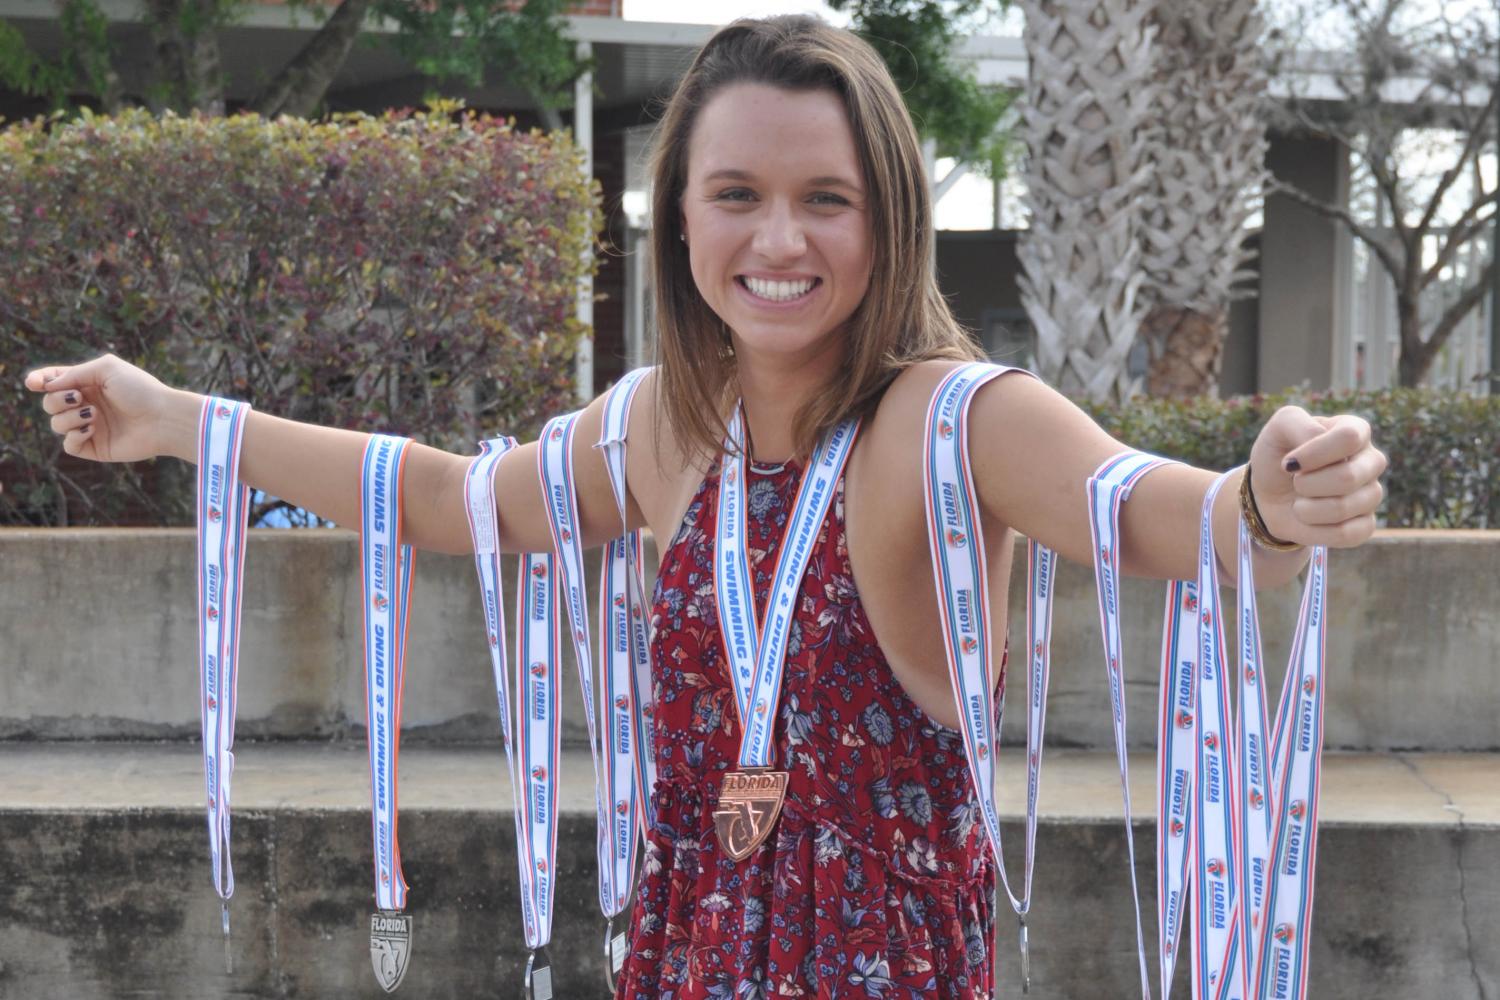 Boddiford with her collection of medals won throughout her four years competing in high school swimming tournaments.